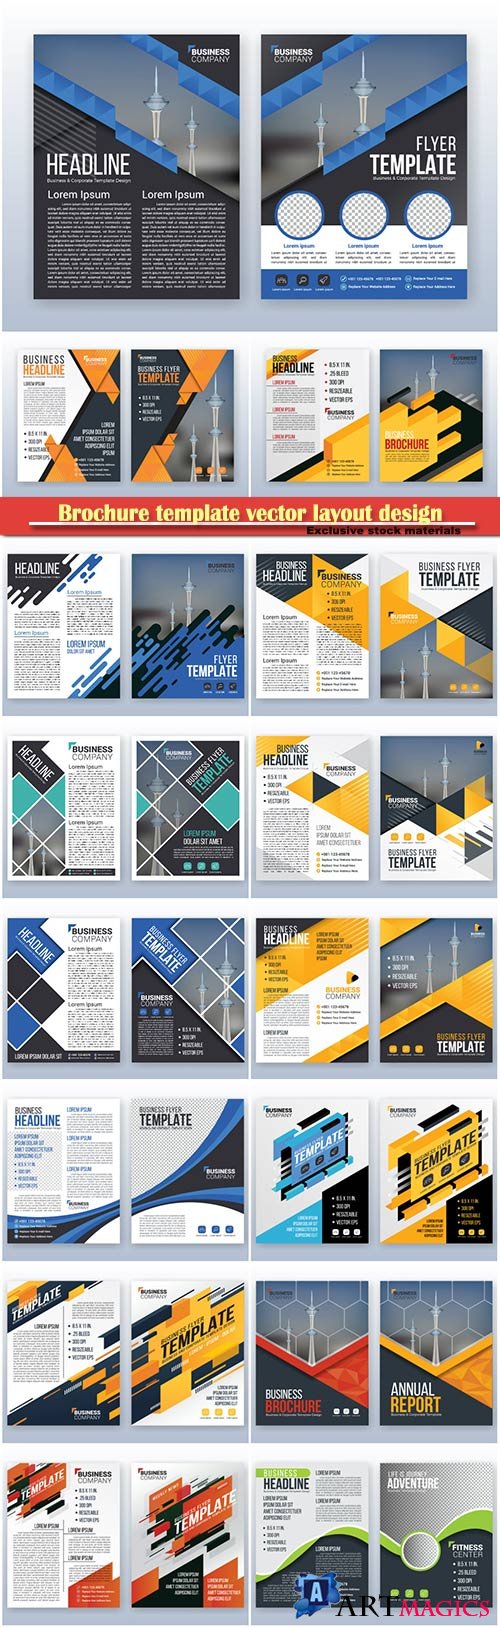 Brochure template vector layout design, corporate business annual report, magazine, flyer mockup # 211